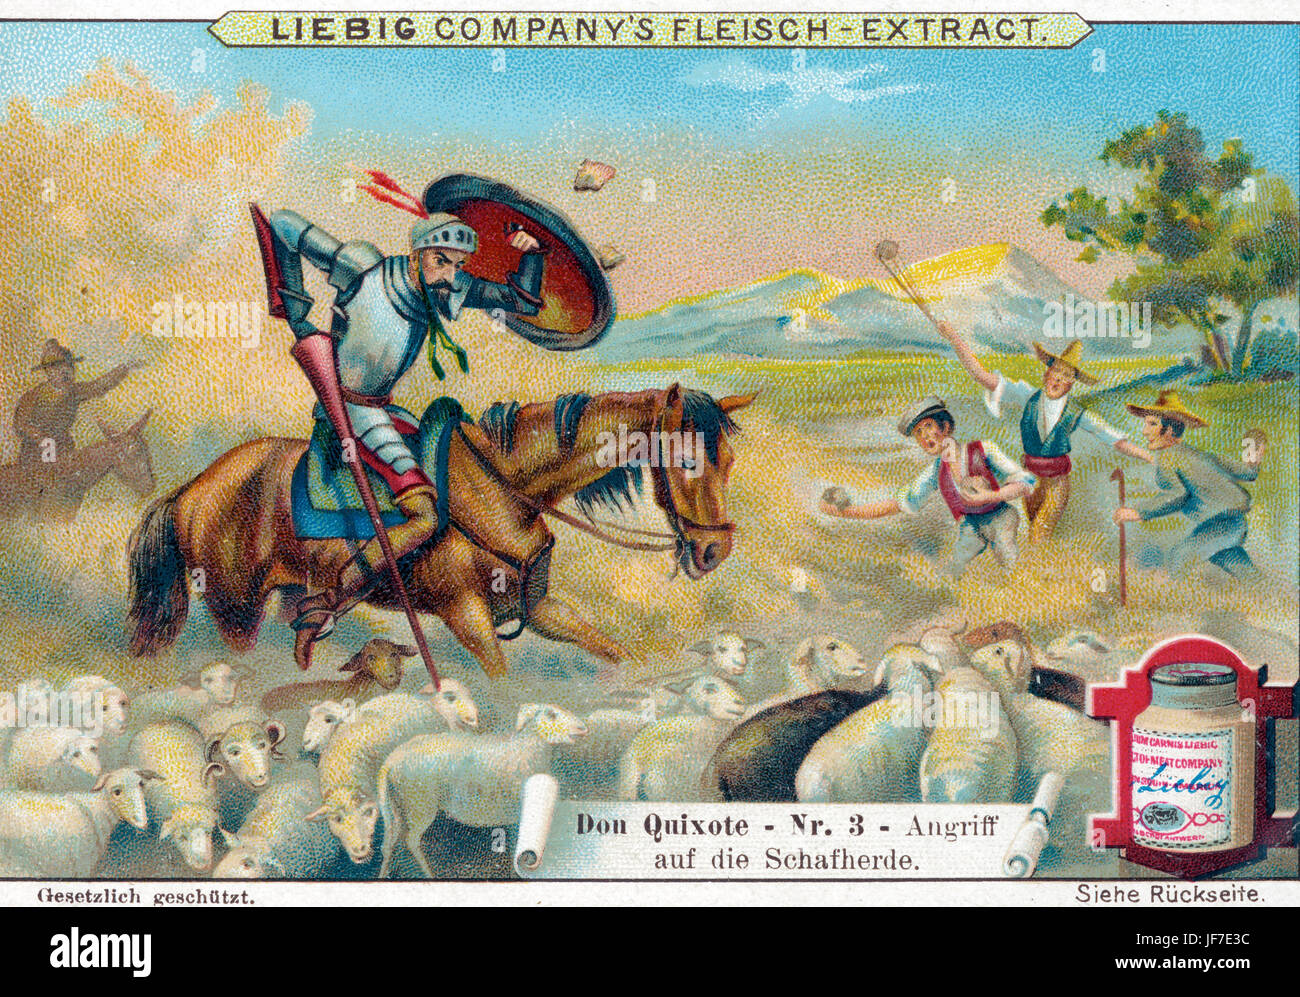 DON QUIXOTE by Cervantes -  Attacking the herd of sheep Play by Durfey (1694) music written by Purcell.   Symphonic poem by Richard Strauss (1897). Opera by Kienz (1898) Liebig Advertisement. Number 3. Stock Photo